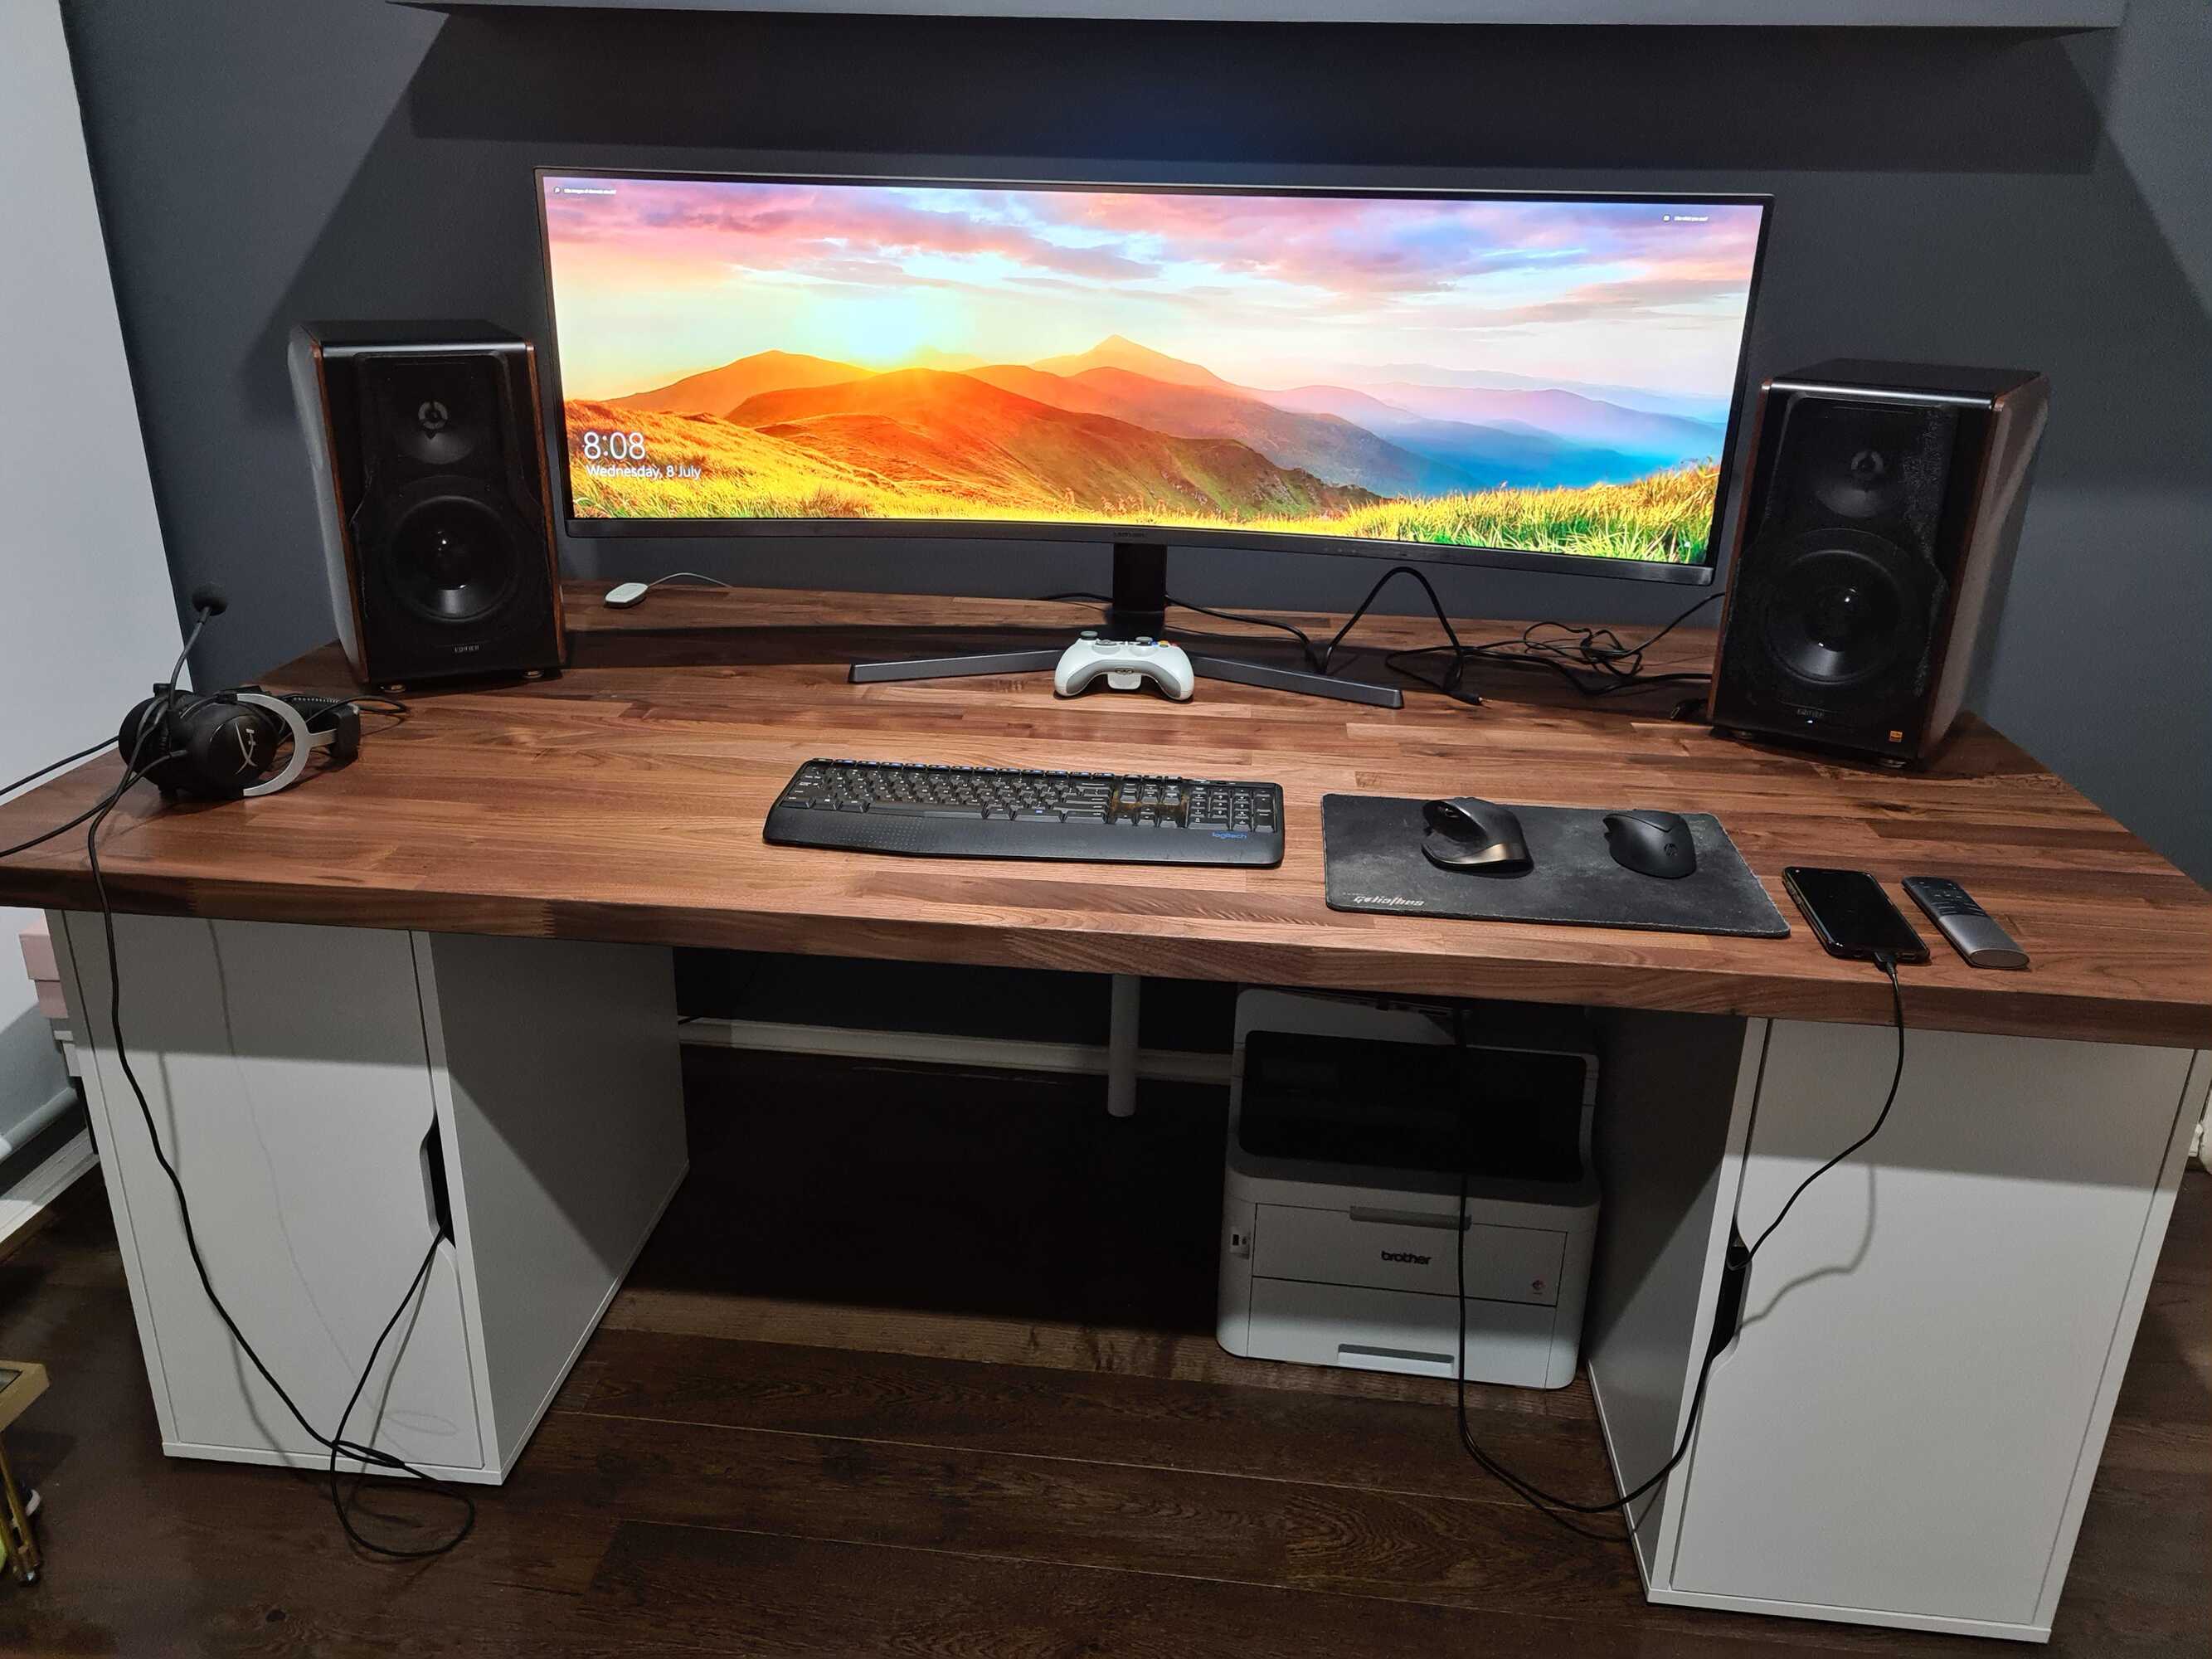 How To Set Up A Surround Sound System On A PC